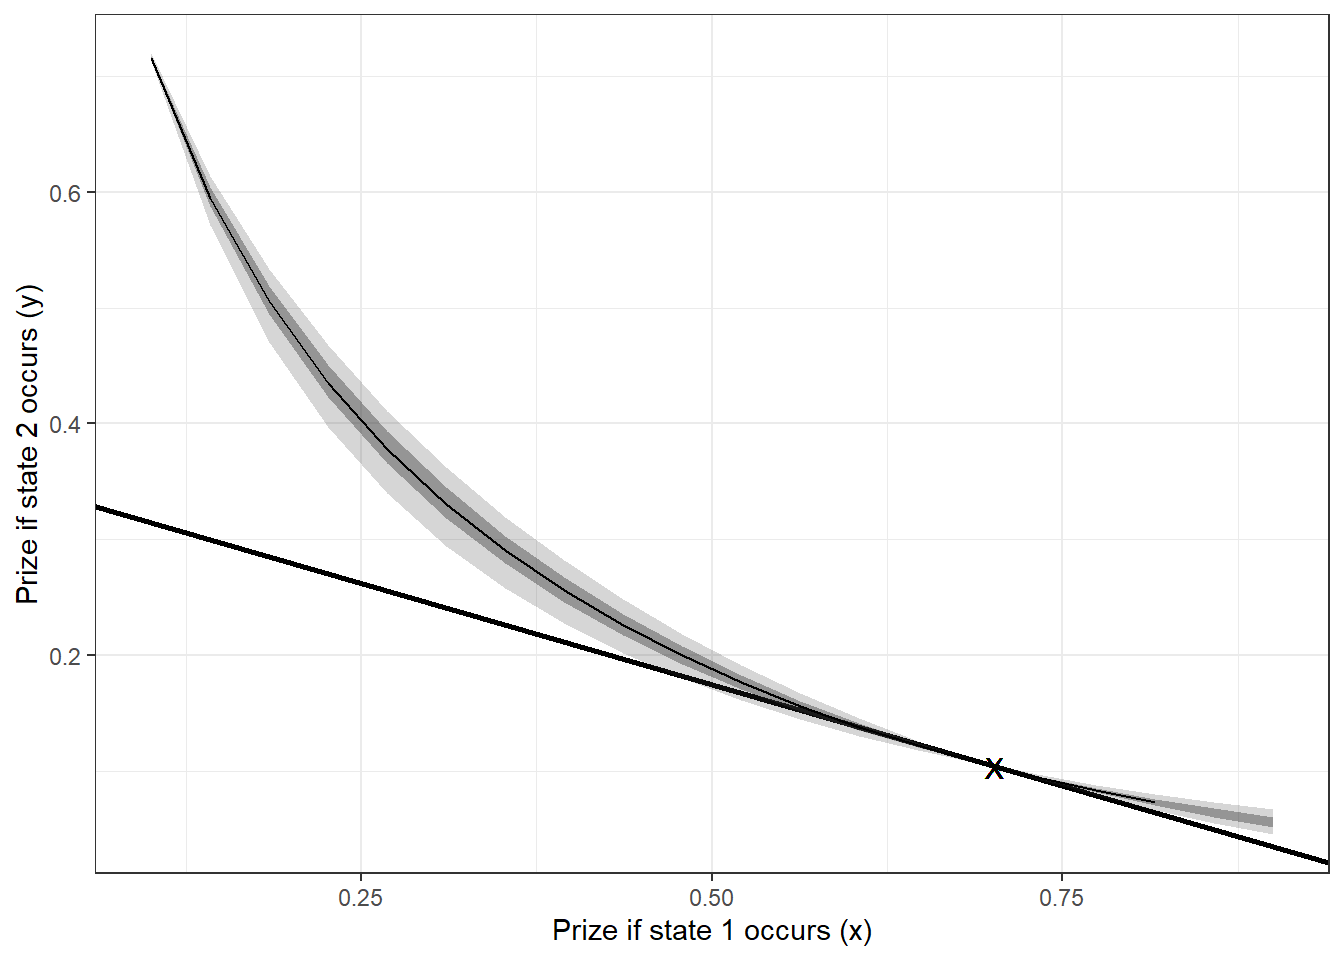 Estimated indifference curve of the first choice made by the participant. Shaded areas show 50% and 95% Bayesian credible regions. X denotes the choice made by the participant.